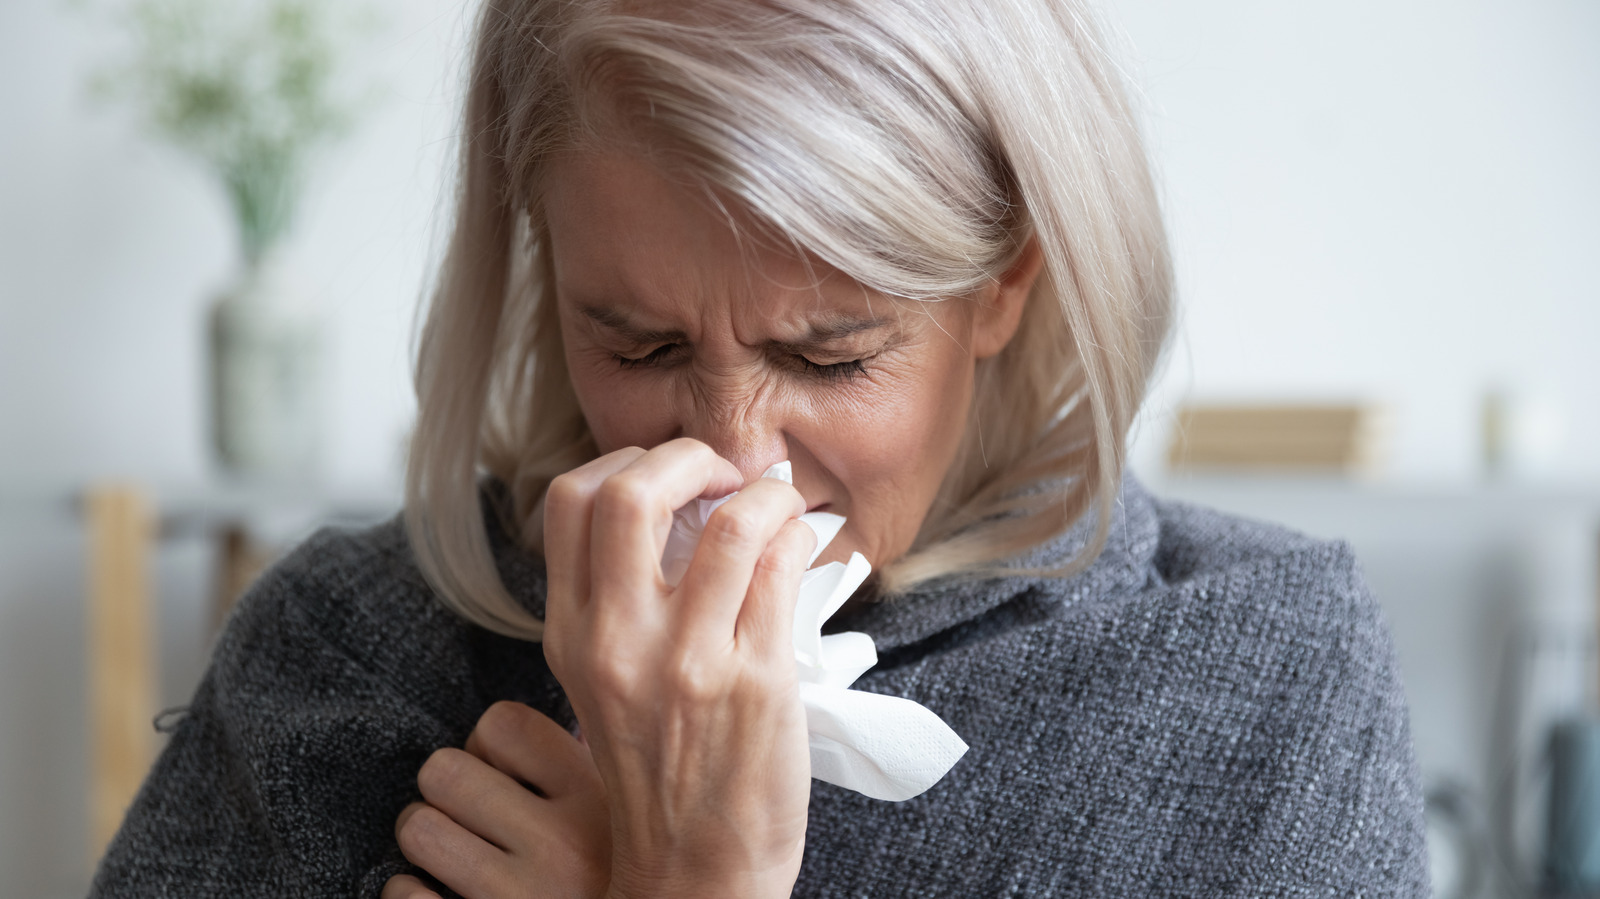 Can You Develop Allergies Later in Life